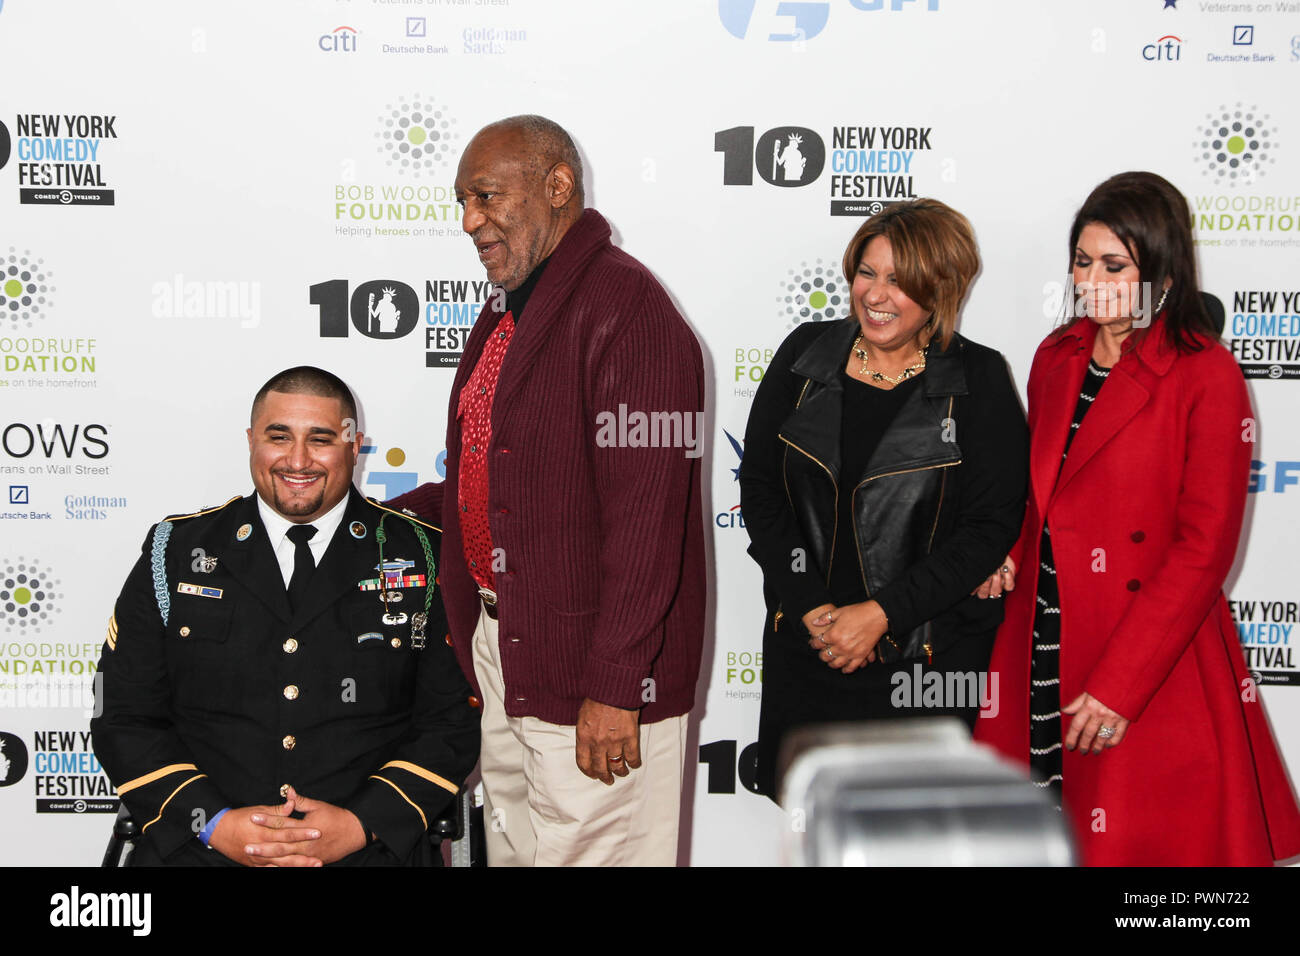 NEW YORK, NY - NOVEMBER 06: (L-R) Sergeant Shane Parsons, Bill Cosby, Cynthia Parsons, and Caroline Hirsch attend the 7th annual 'Stand Up for Heroes' Stock Photo